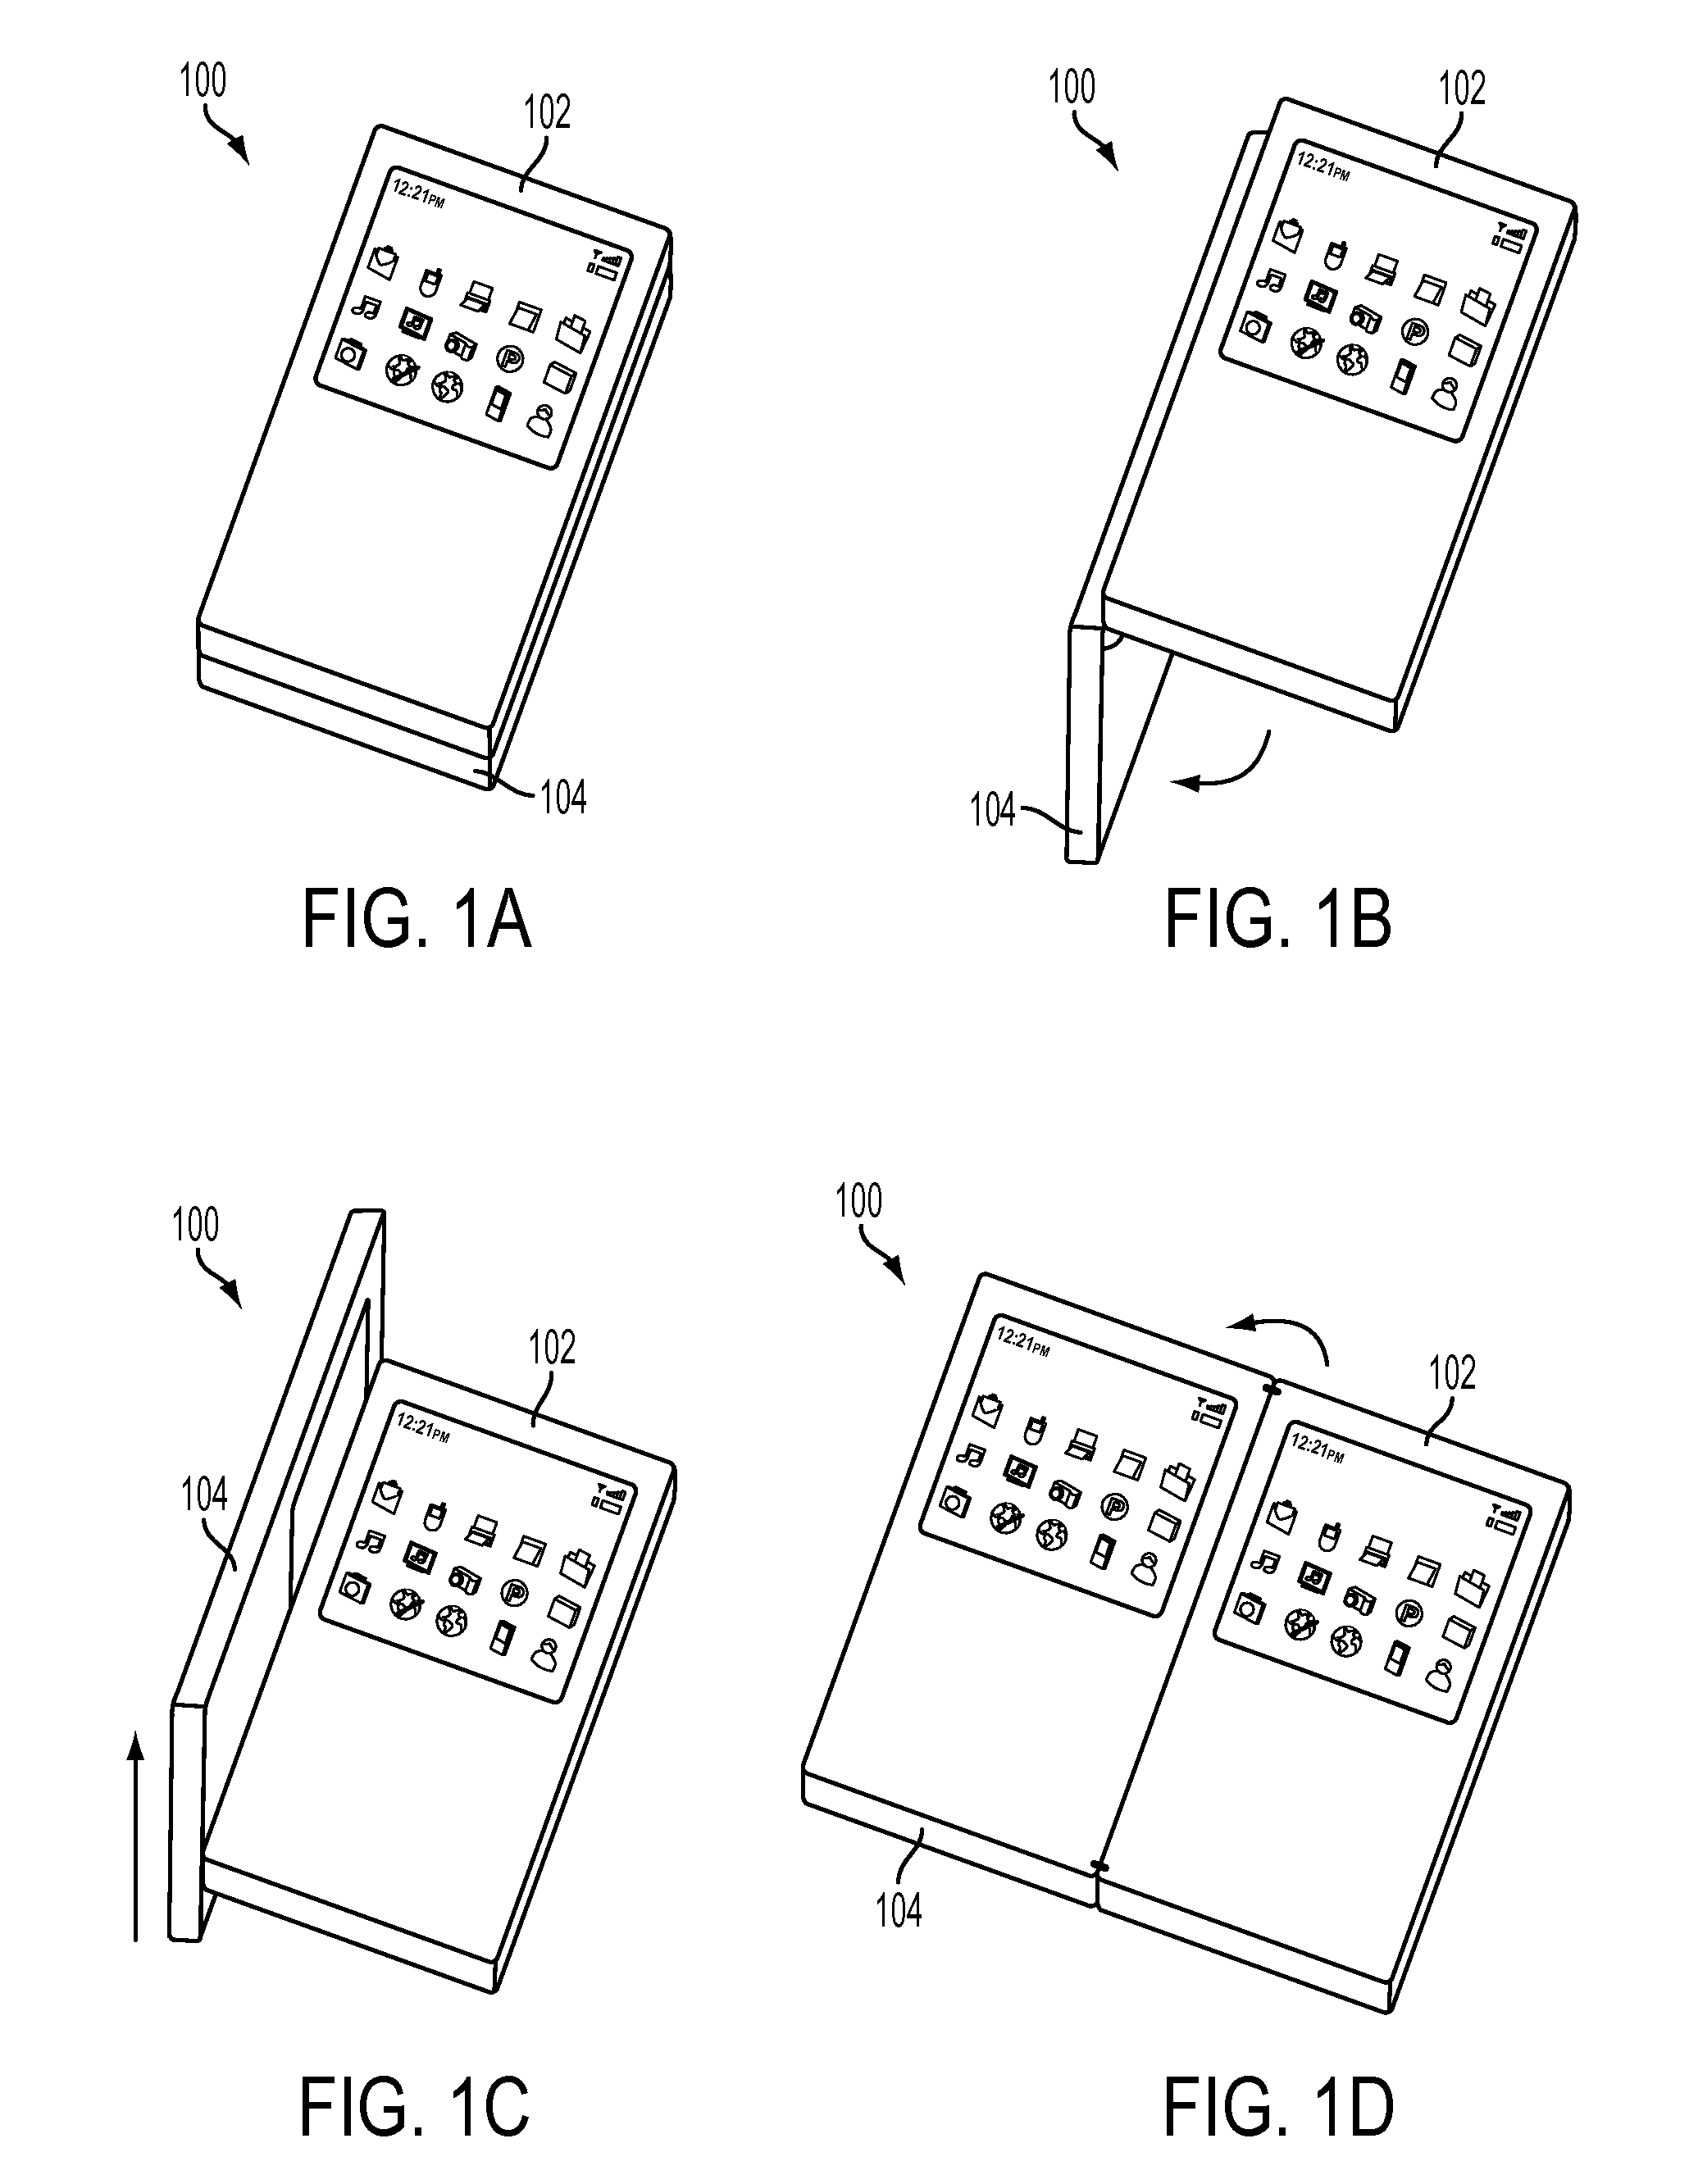 Multiple displays for a portable electronic device and a method of use